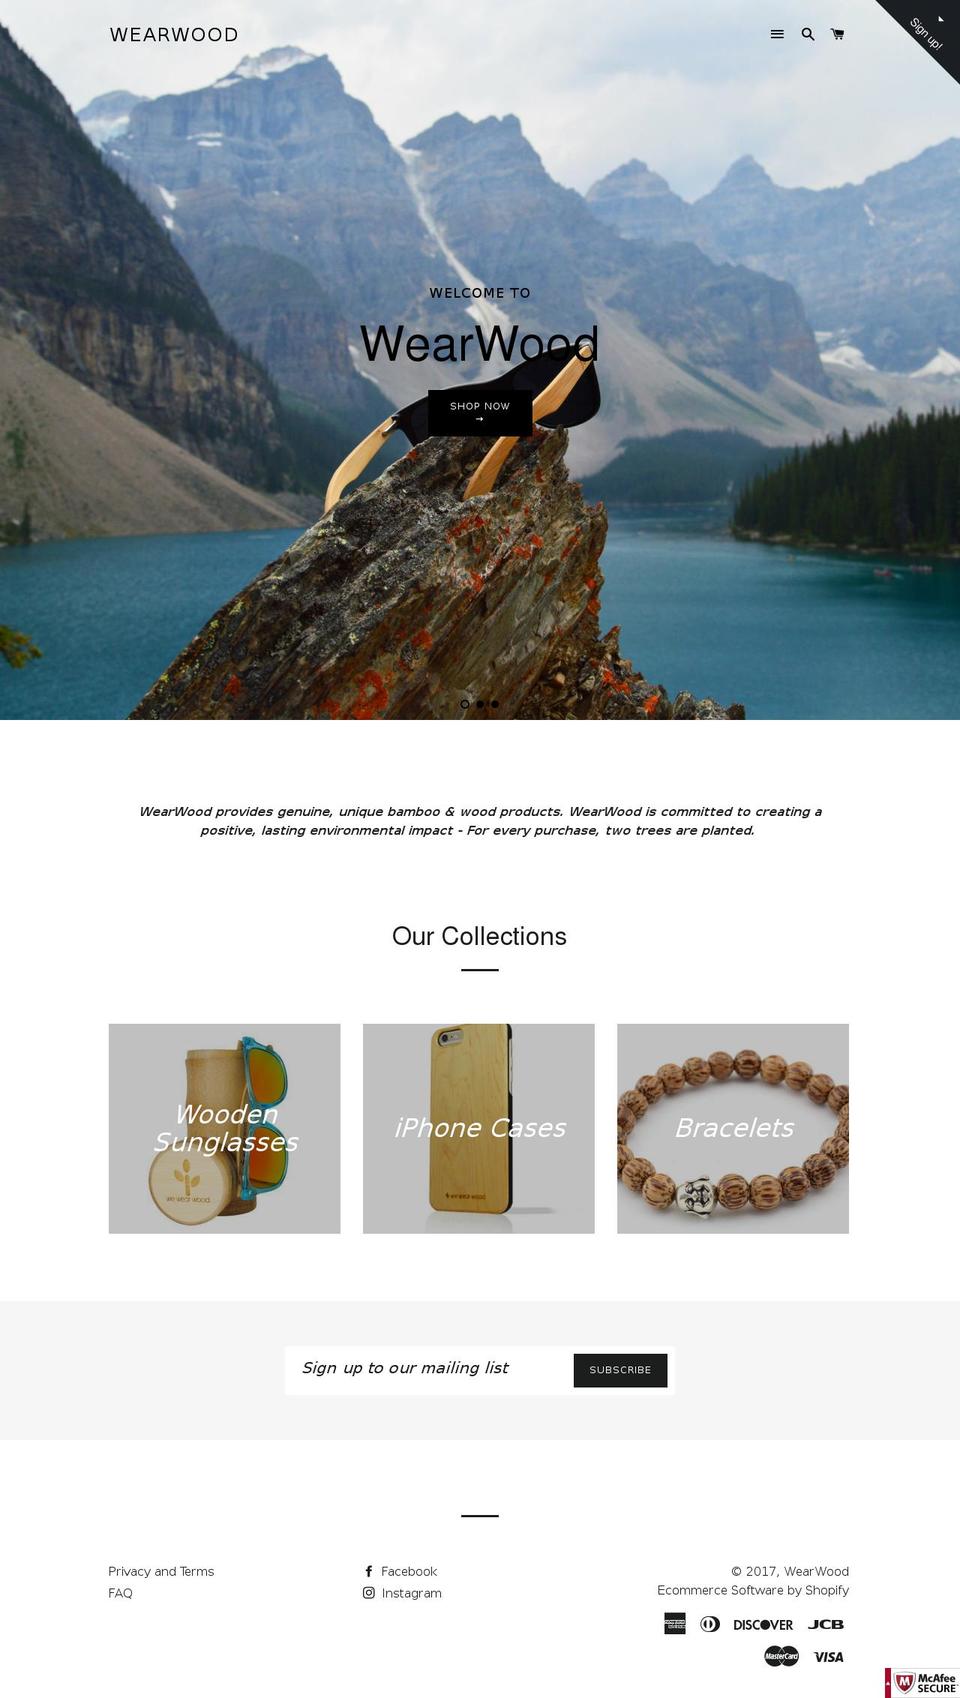 Motion Shopify theme site example wearwood.com